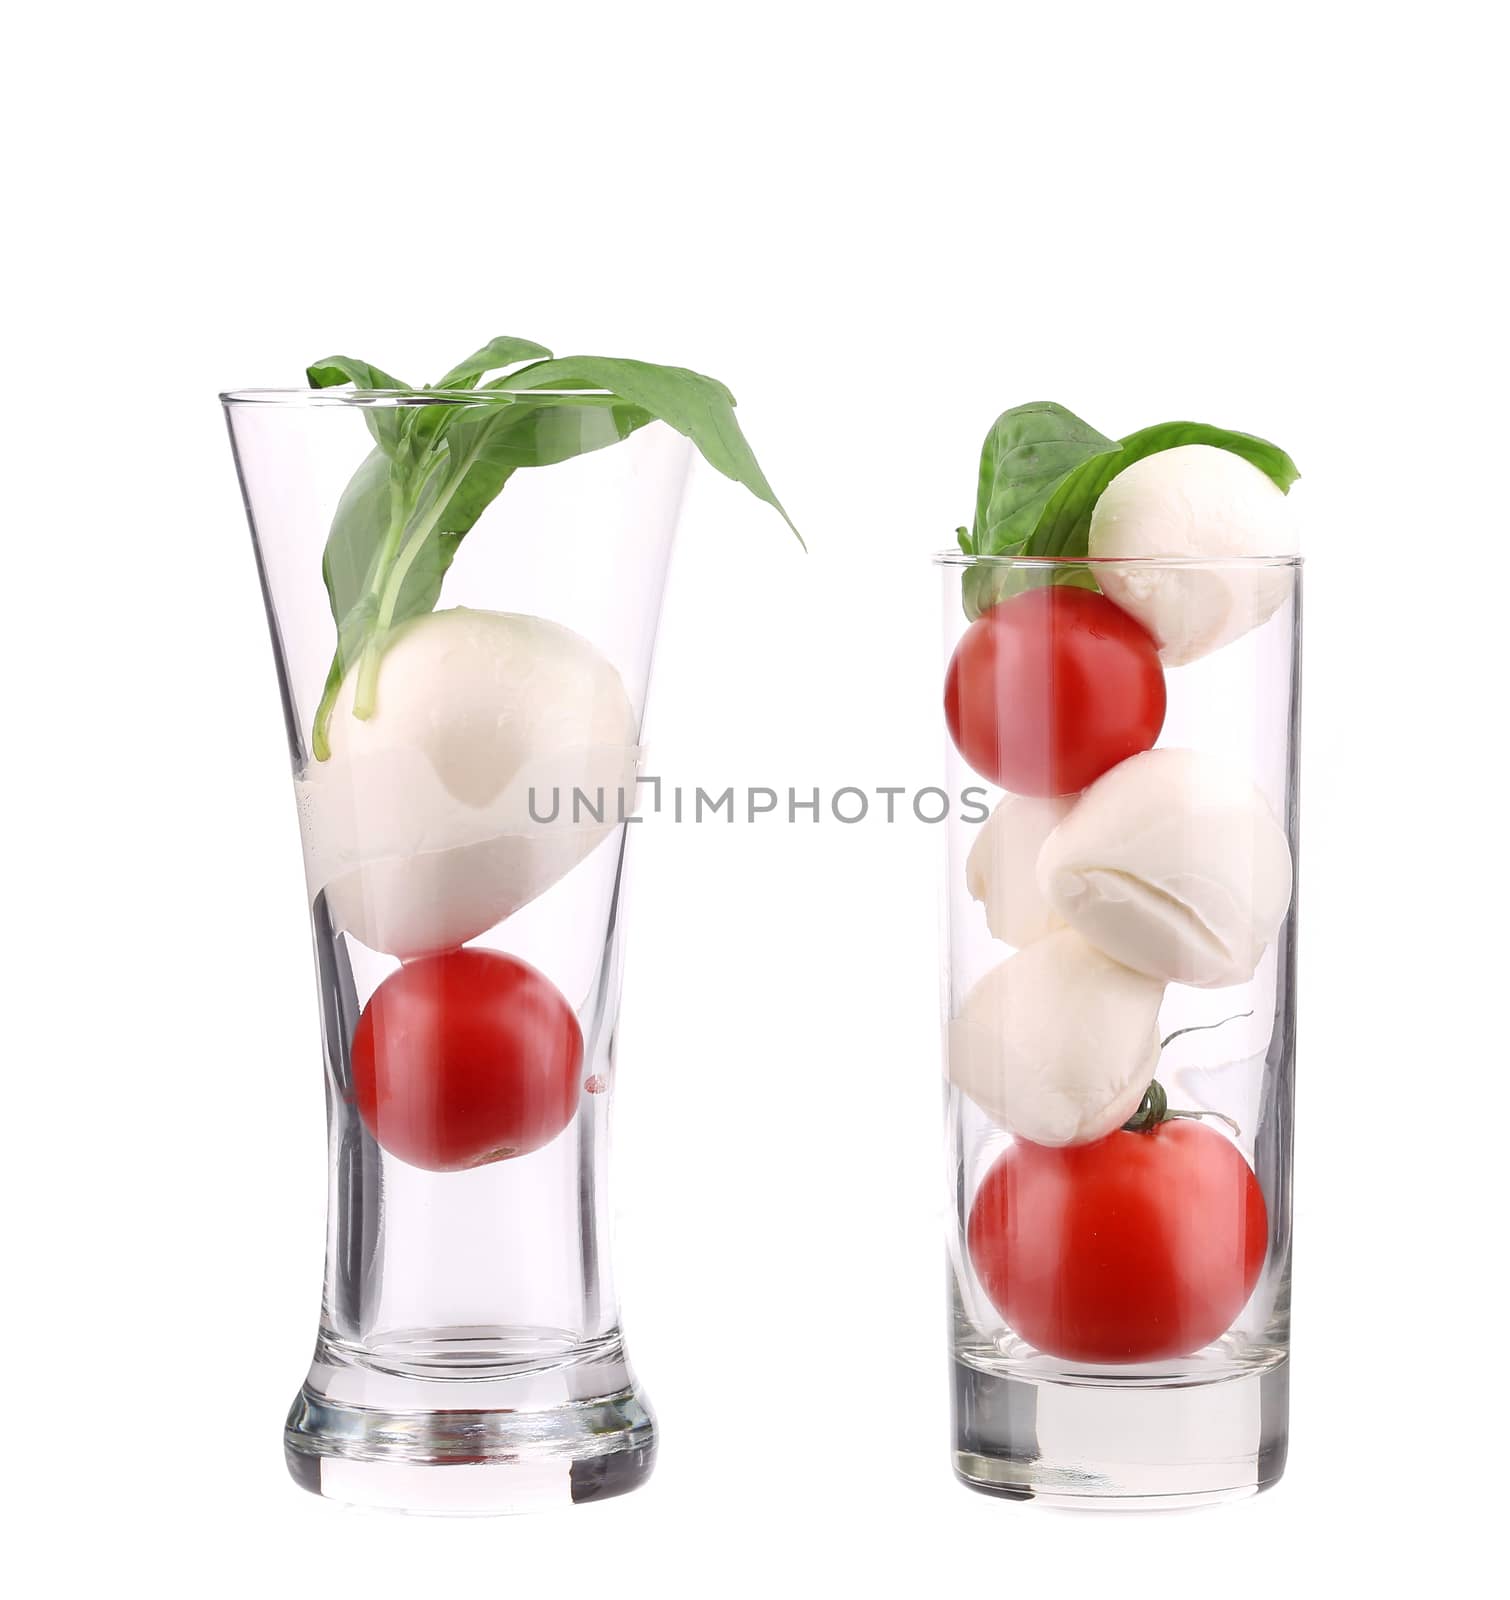 Tomatoes and mozzarella balls in glass. by indigolotos